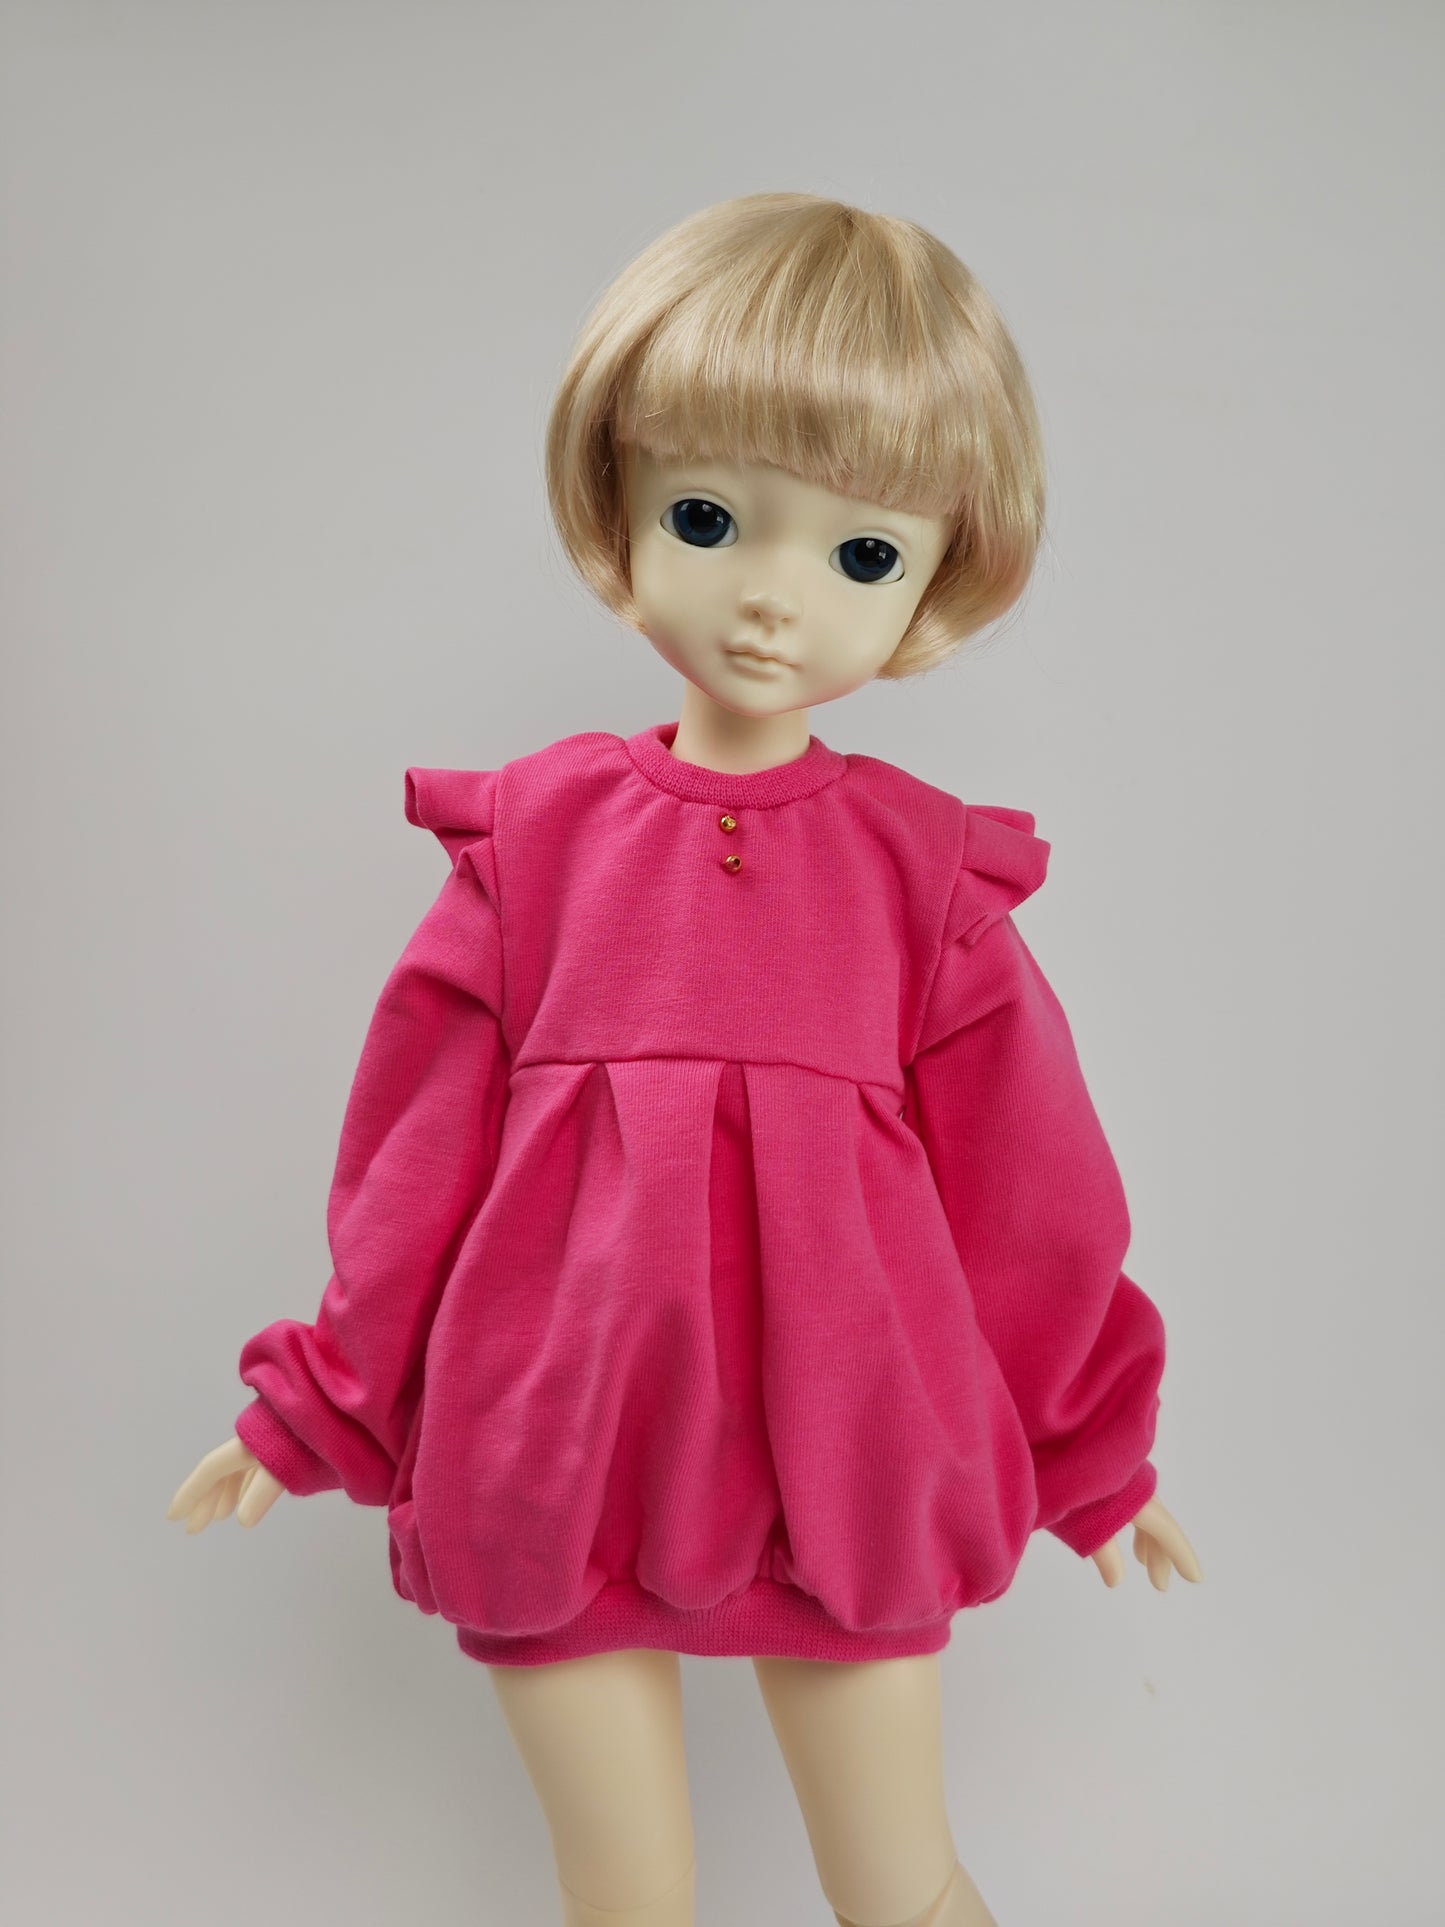 1/4 girl doll Gloria super kid version no makeup with wig and dress